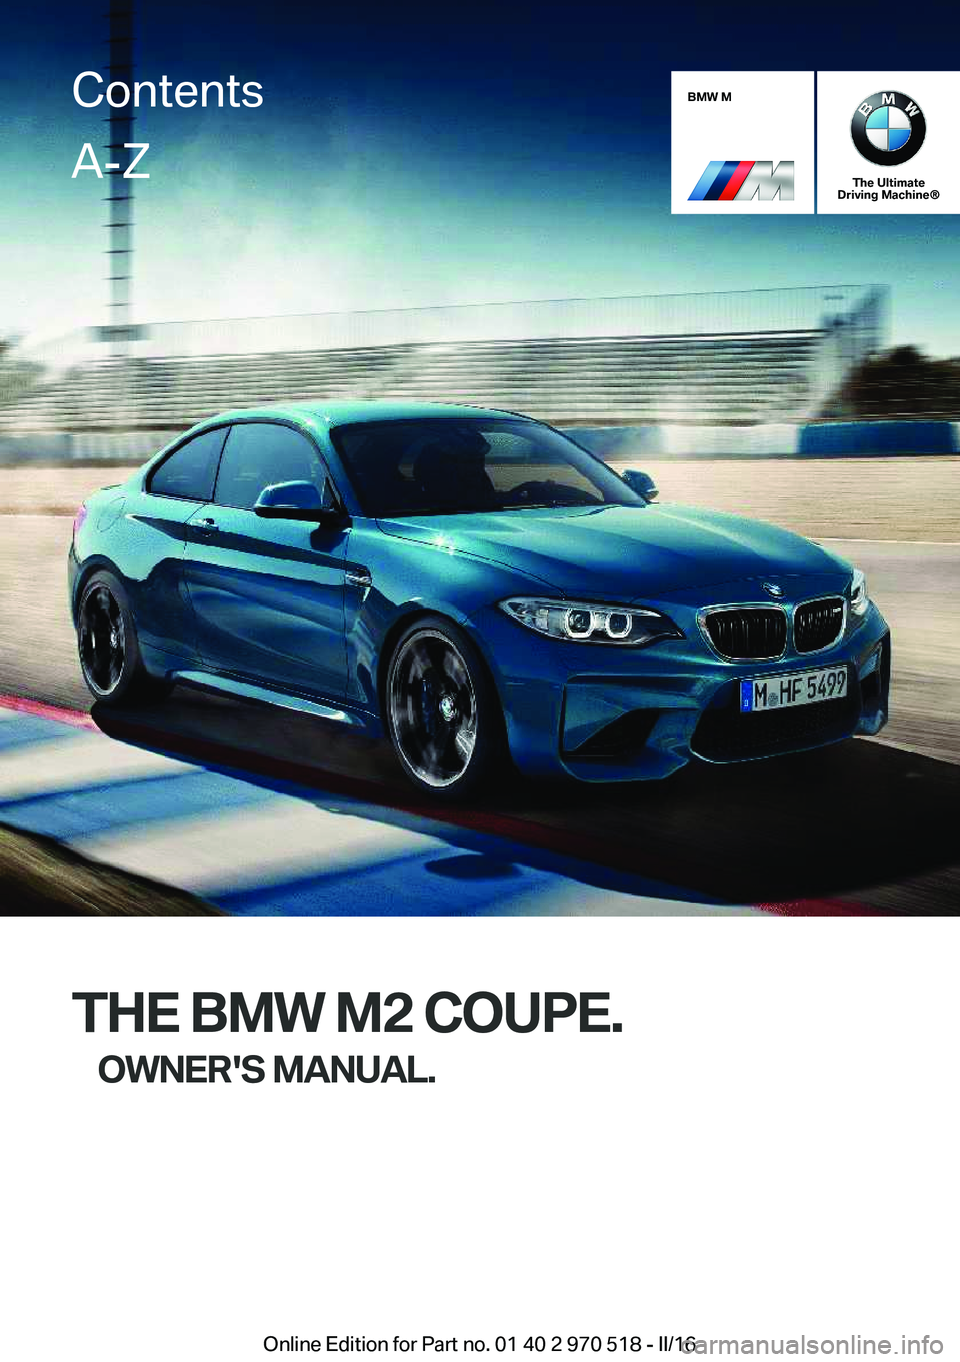 BMW M2 COUPE 2016  Owners Manual BMW M
The Ultimate
Driving Machine®
THE BMW M2 COUPE.
OWNER'S MANUAL.
ContentsA-Z
Online Edition for Part no. 01 40 2 970 518 - II/16   